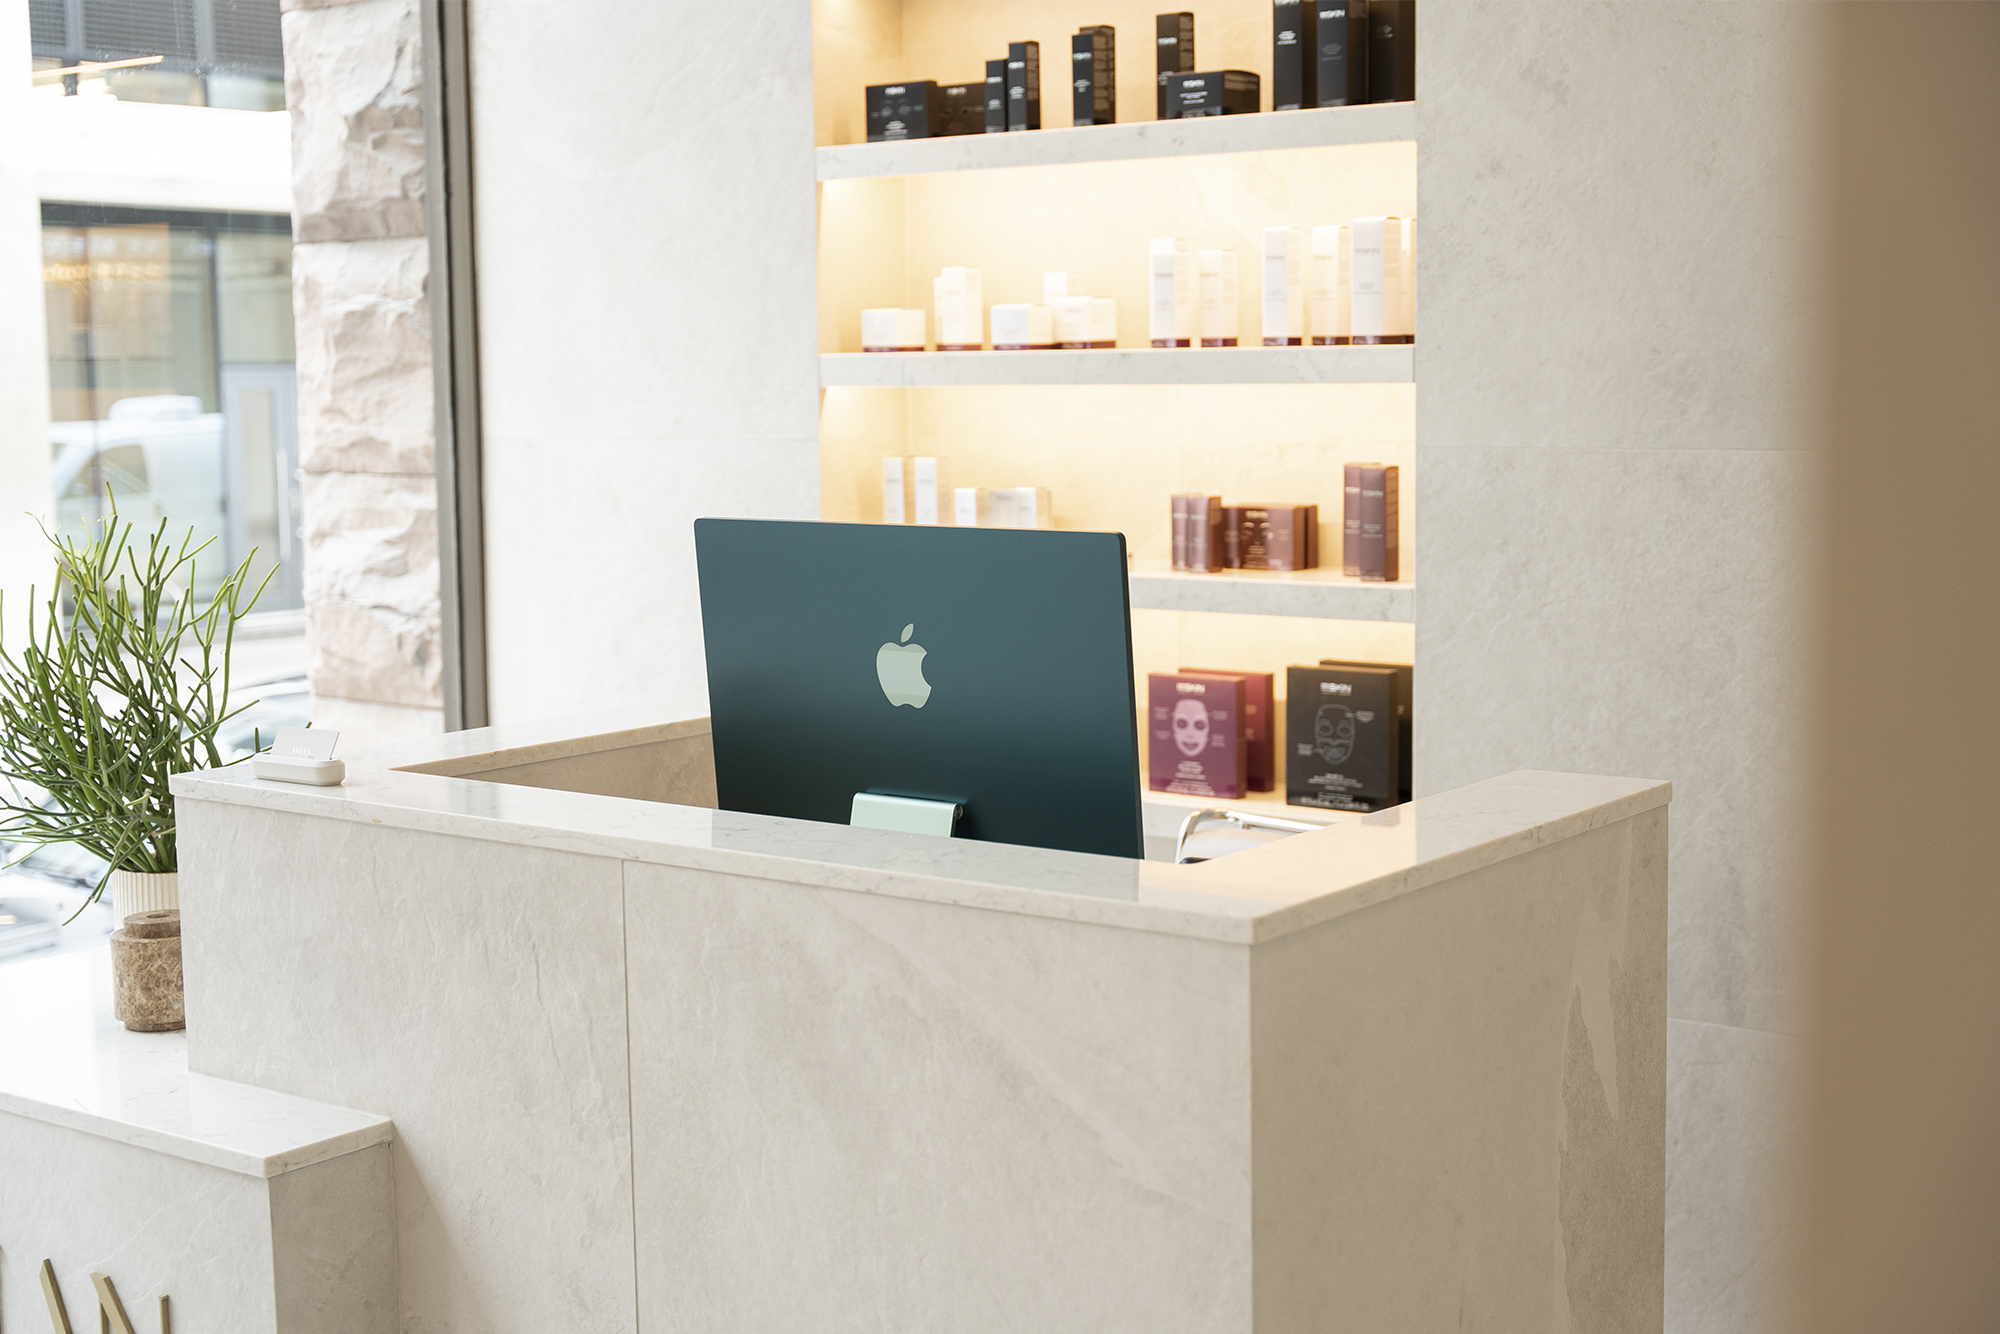 Aman Spa front desk, with shelf of products behind desk, Mac computer on front desk